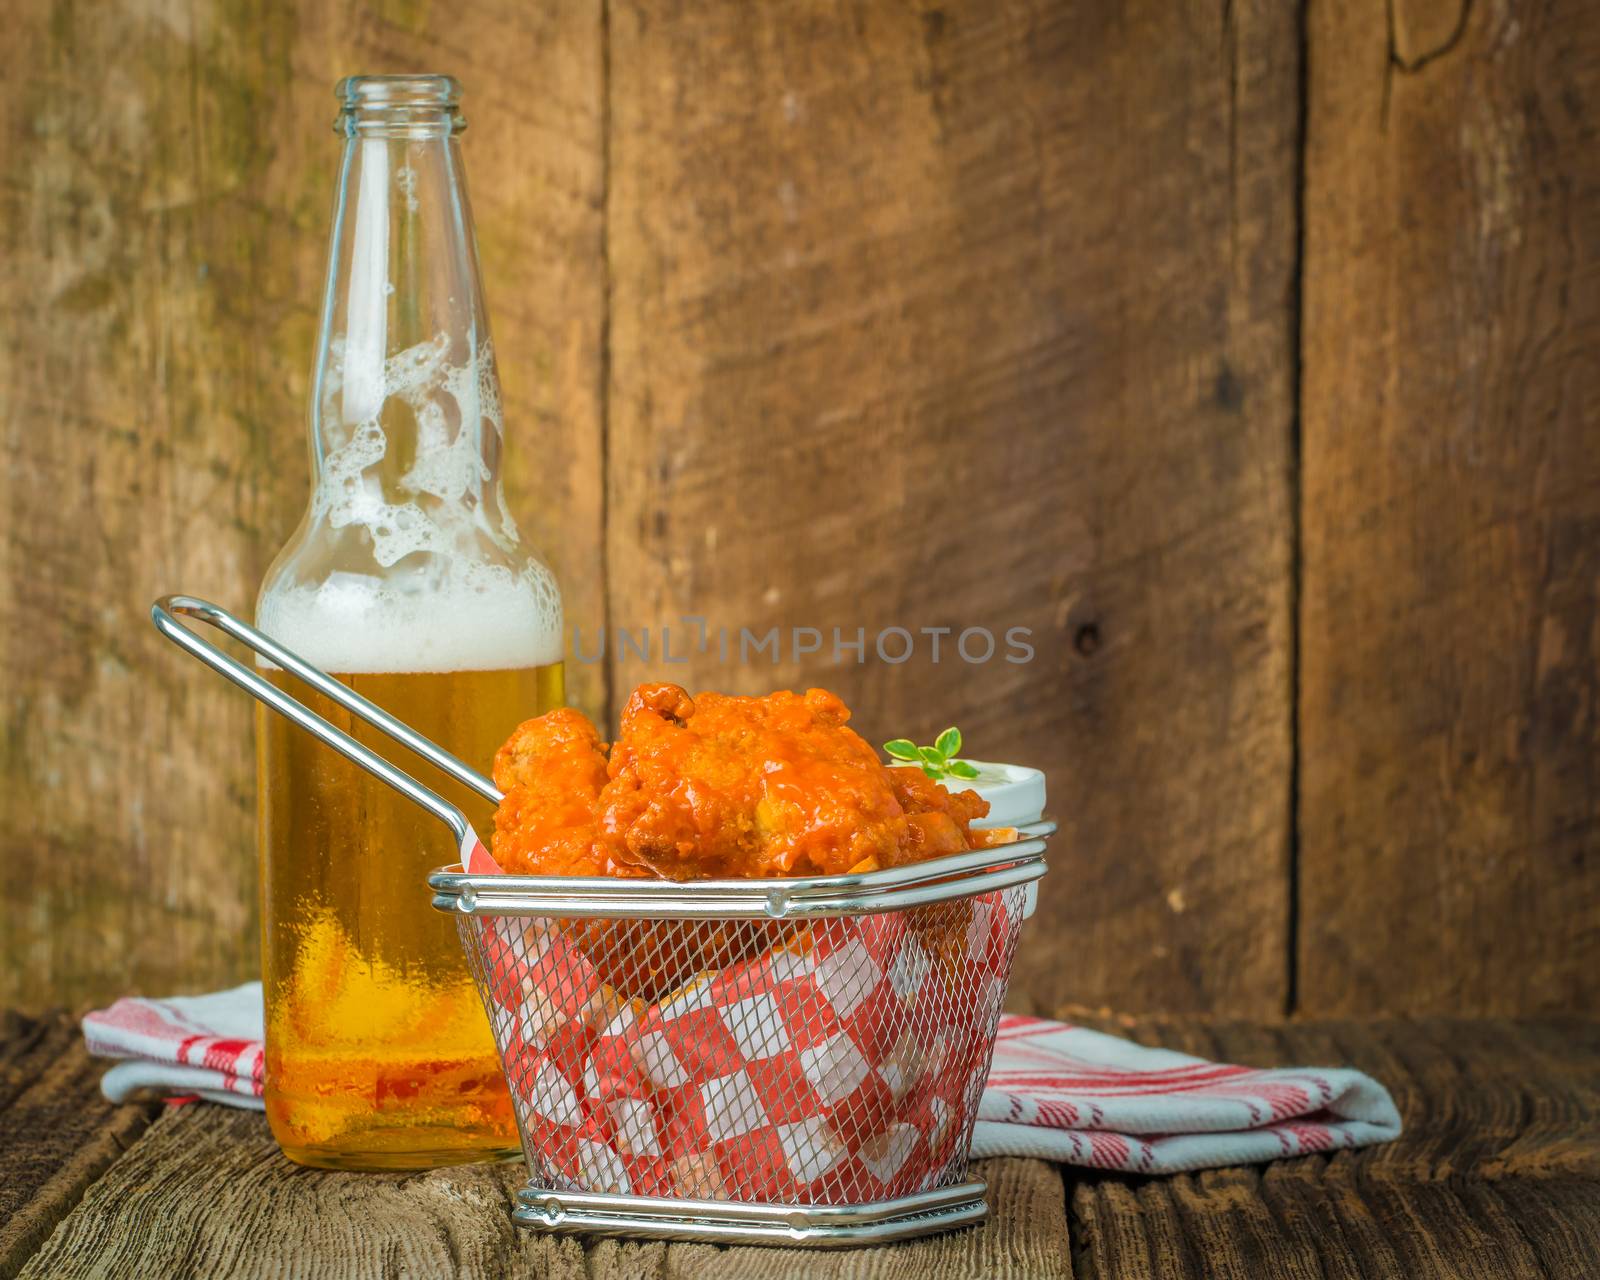 Spicy buffalo style wings in a basket served with cold beer.